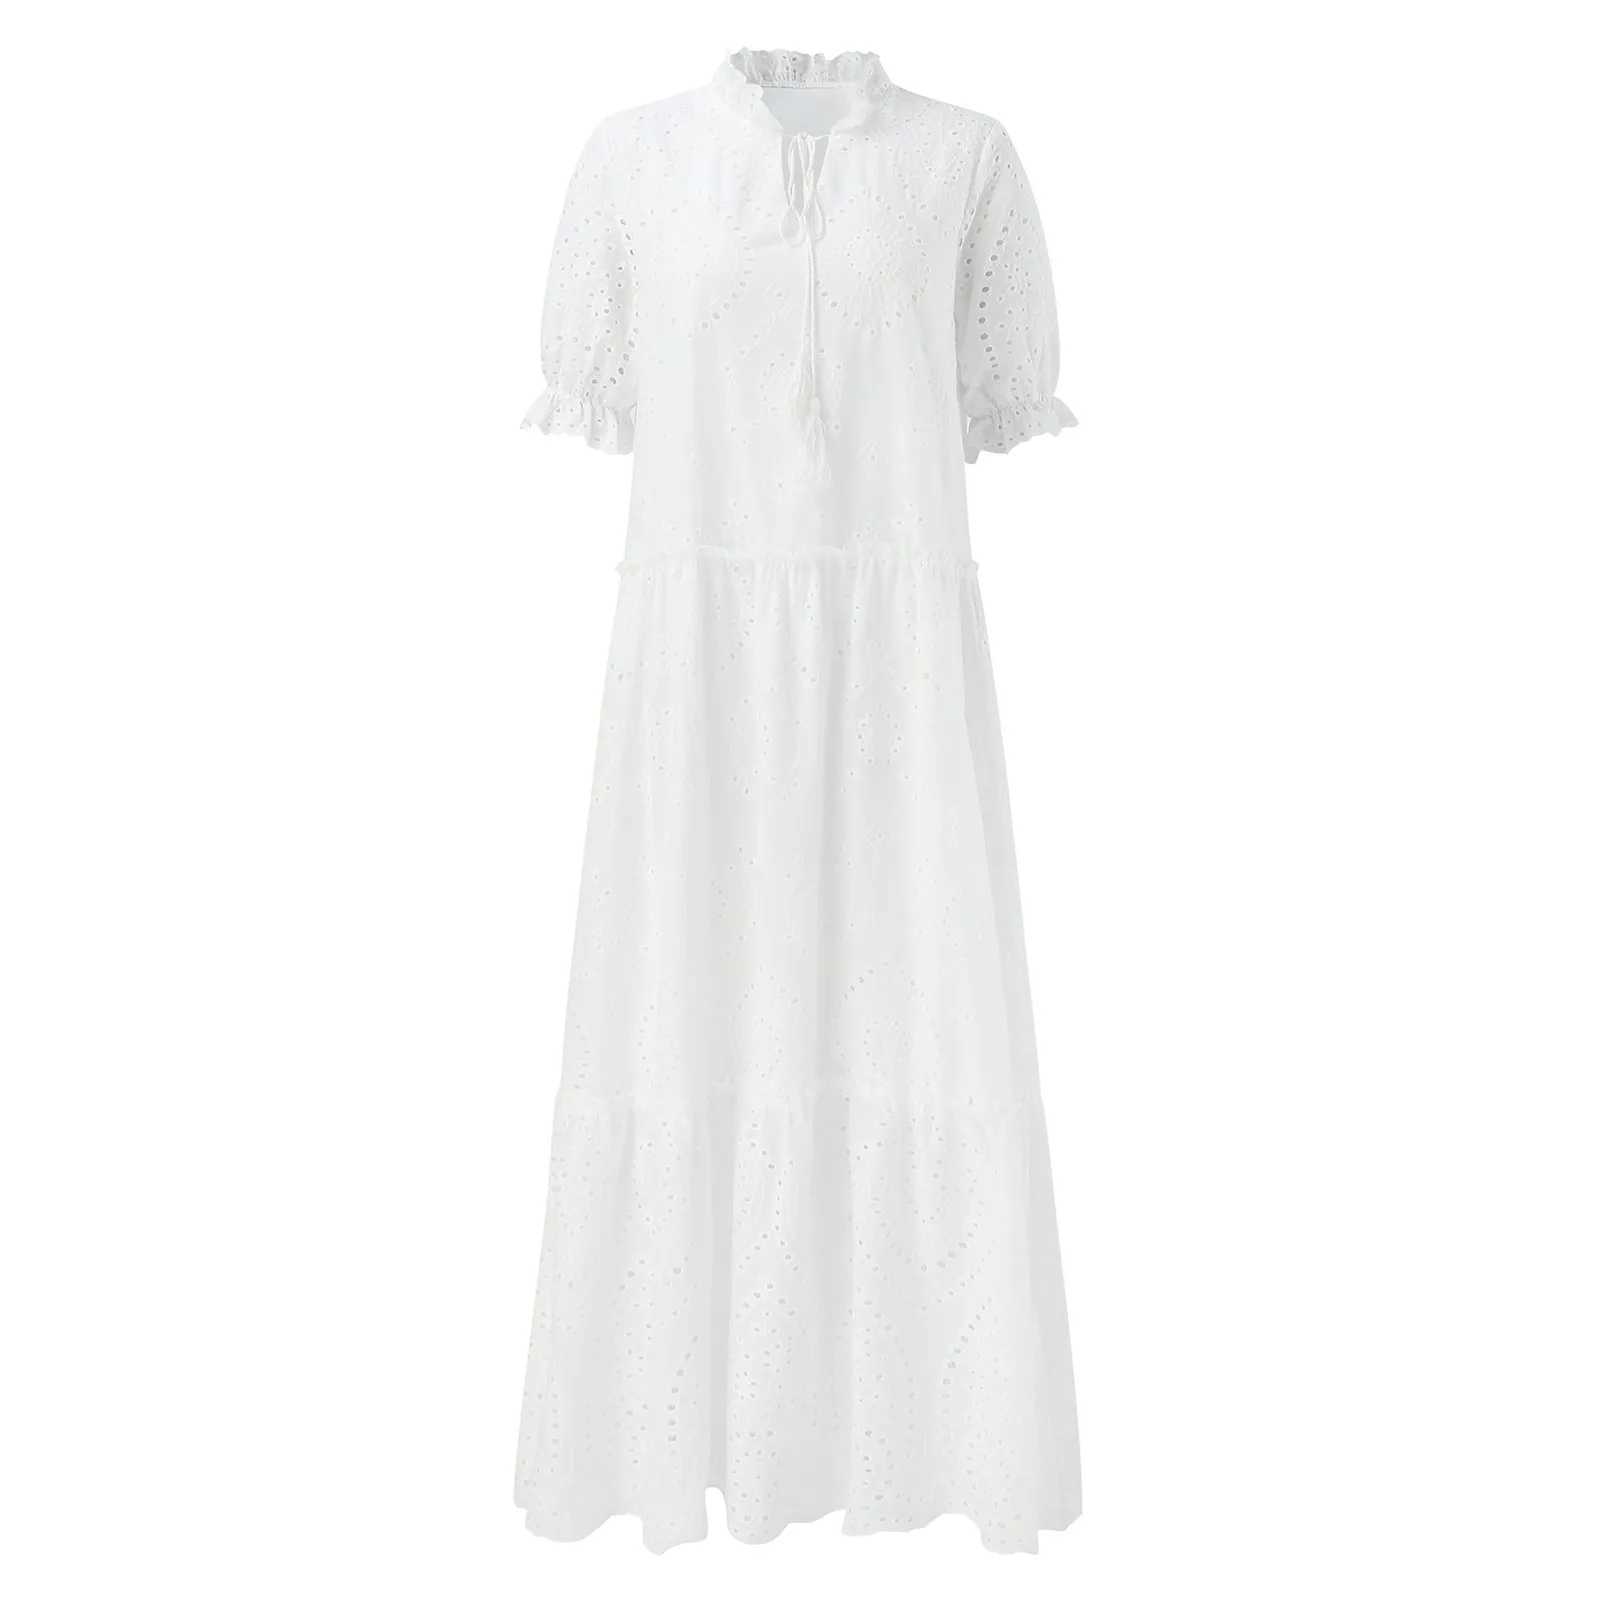 Basic Casual Dresses 2023 New Casual Lace Flower White Dress Short sleeved Lace Up V-neck Beach Dress Bohemian Holiday Sun Dress Womens Robe Womens J240222